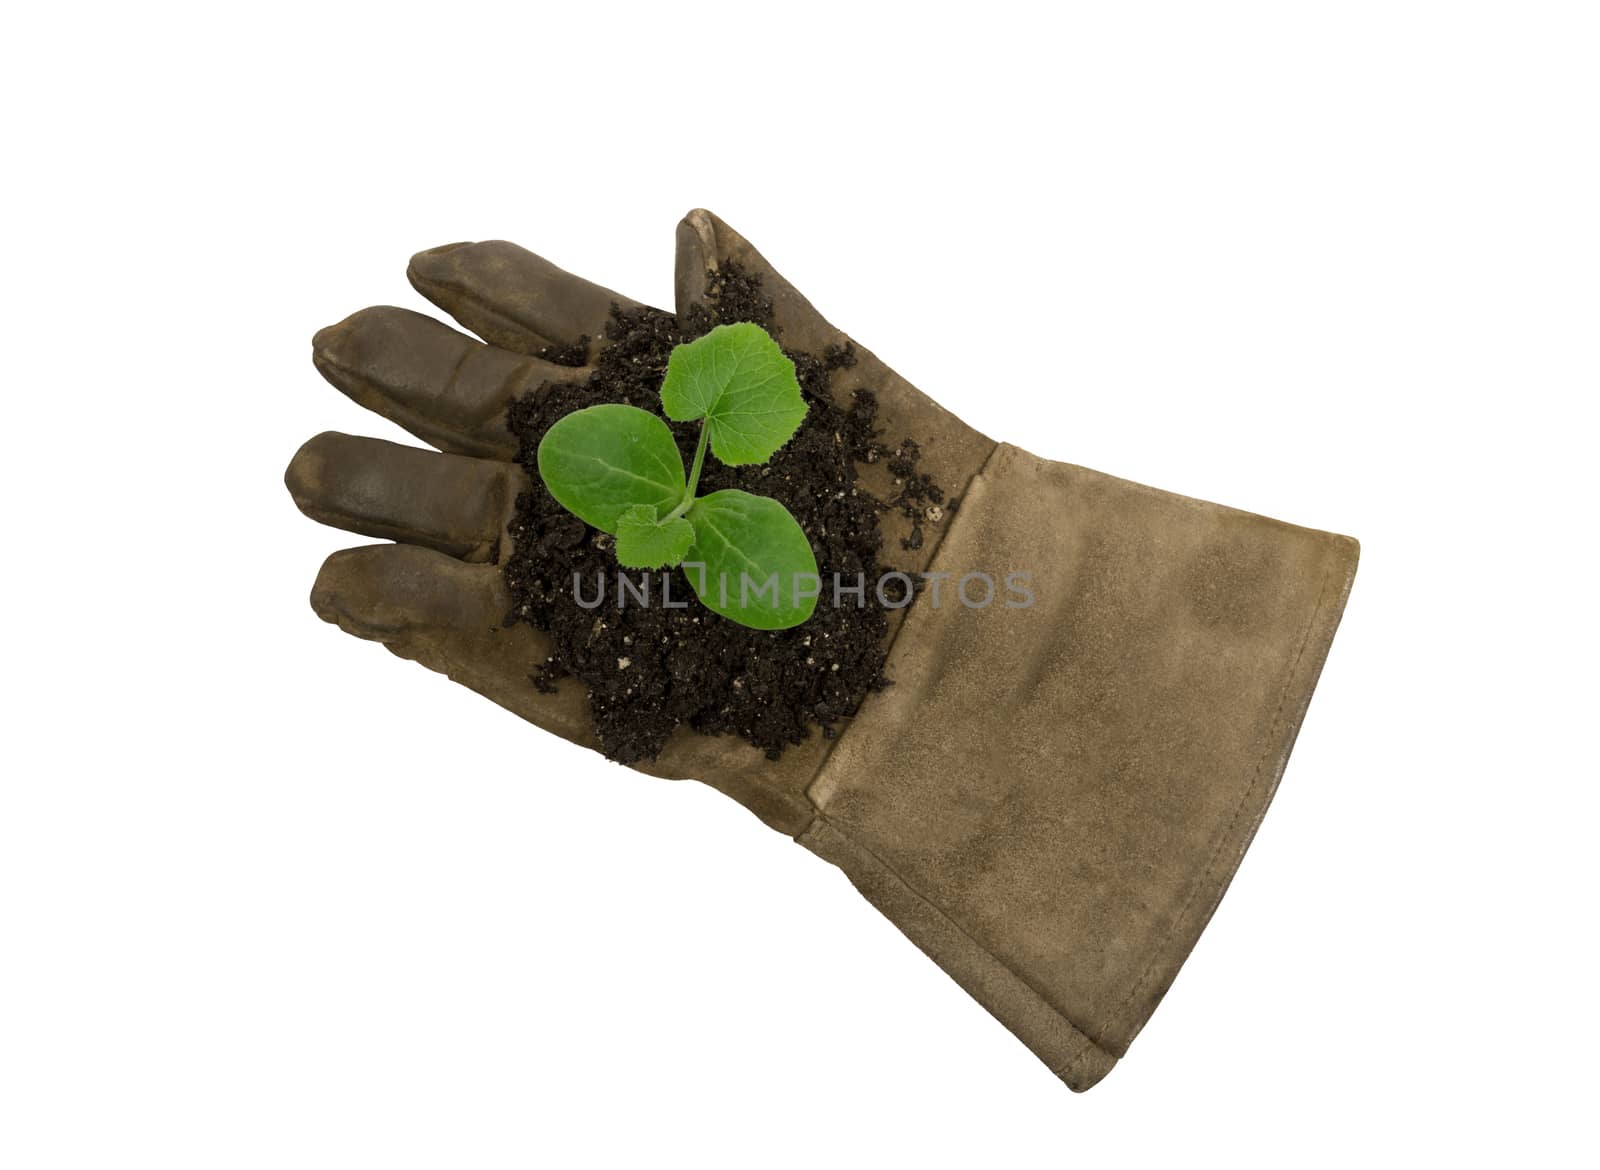 Young Plant On Old Glove by stockbuster1